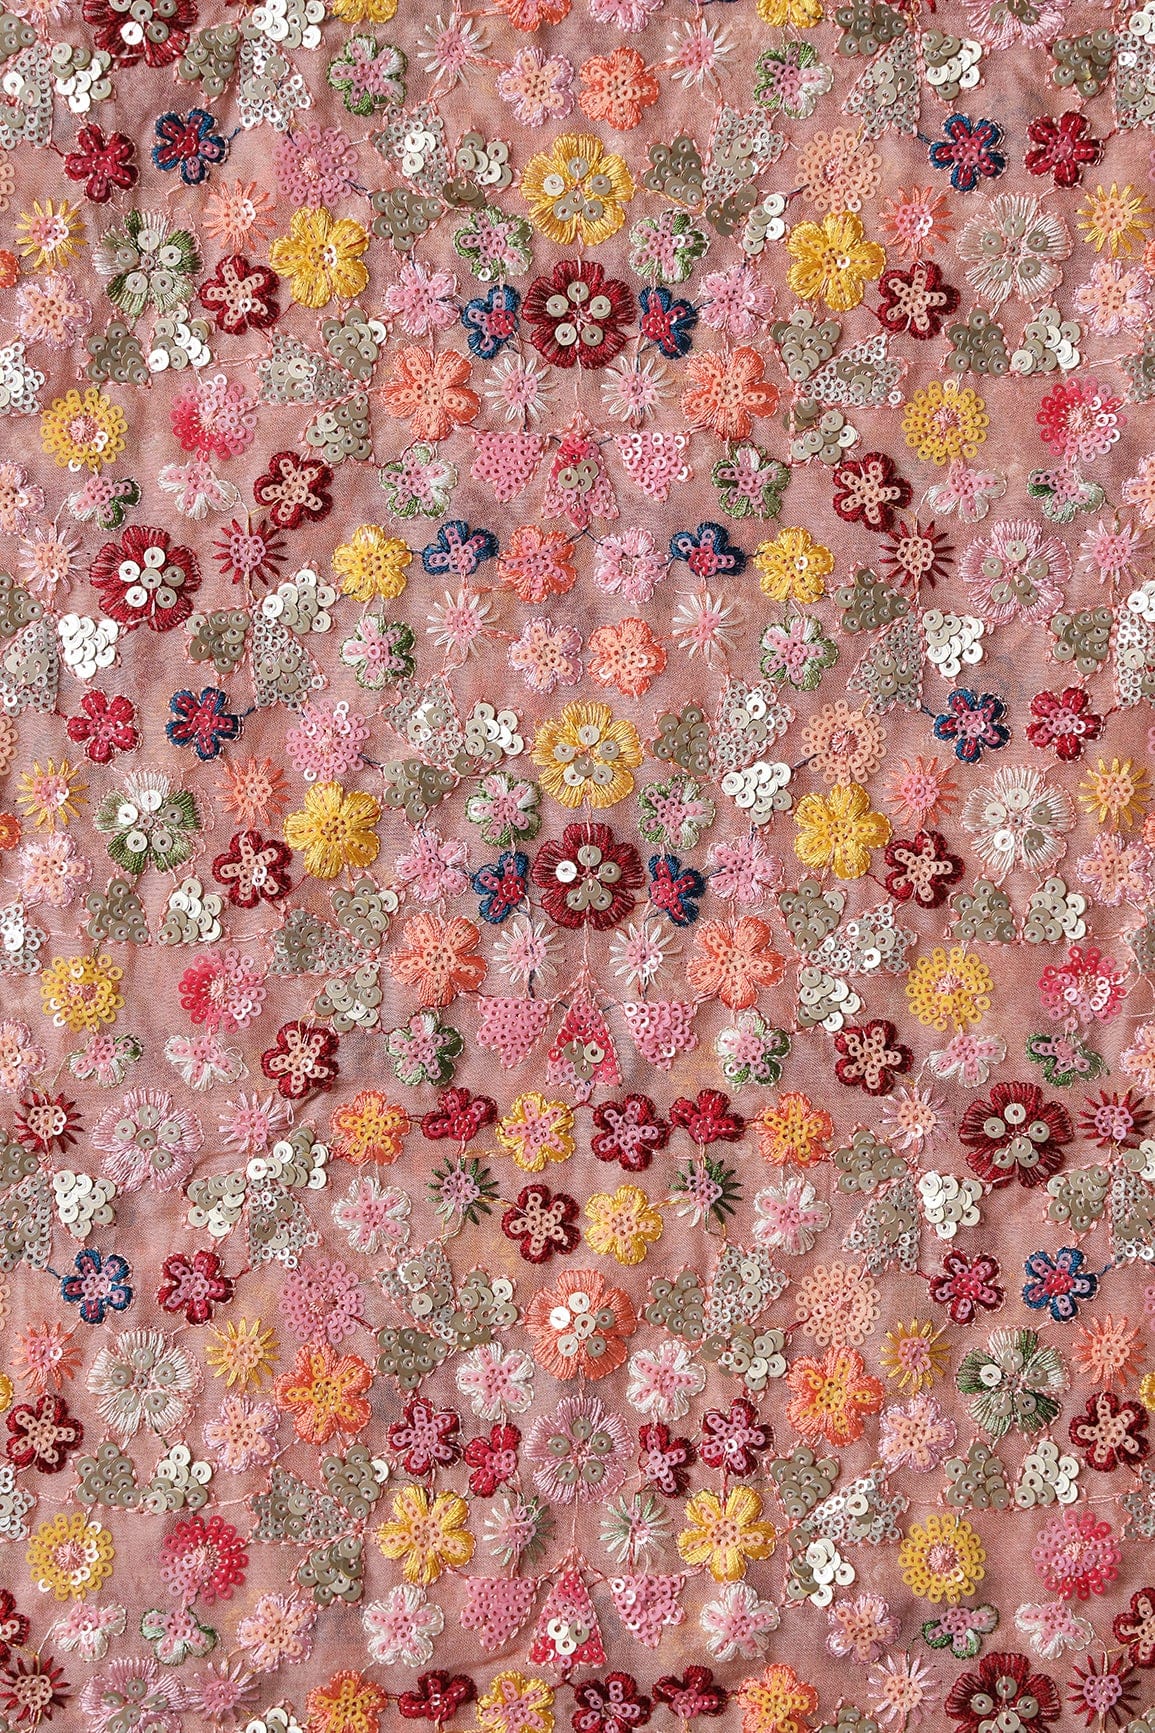 doeraa Embroidery Fabrics Wonderful Multi Thread With Multi Sequins Floral Embroidery On Peach Viscose Georgette Fabric